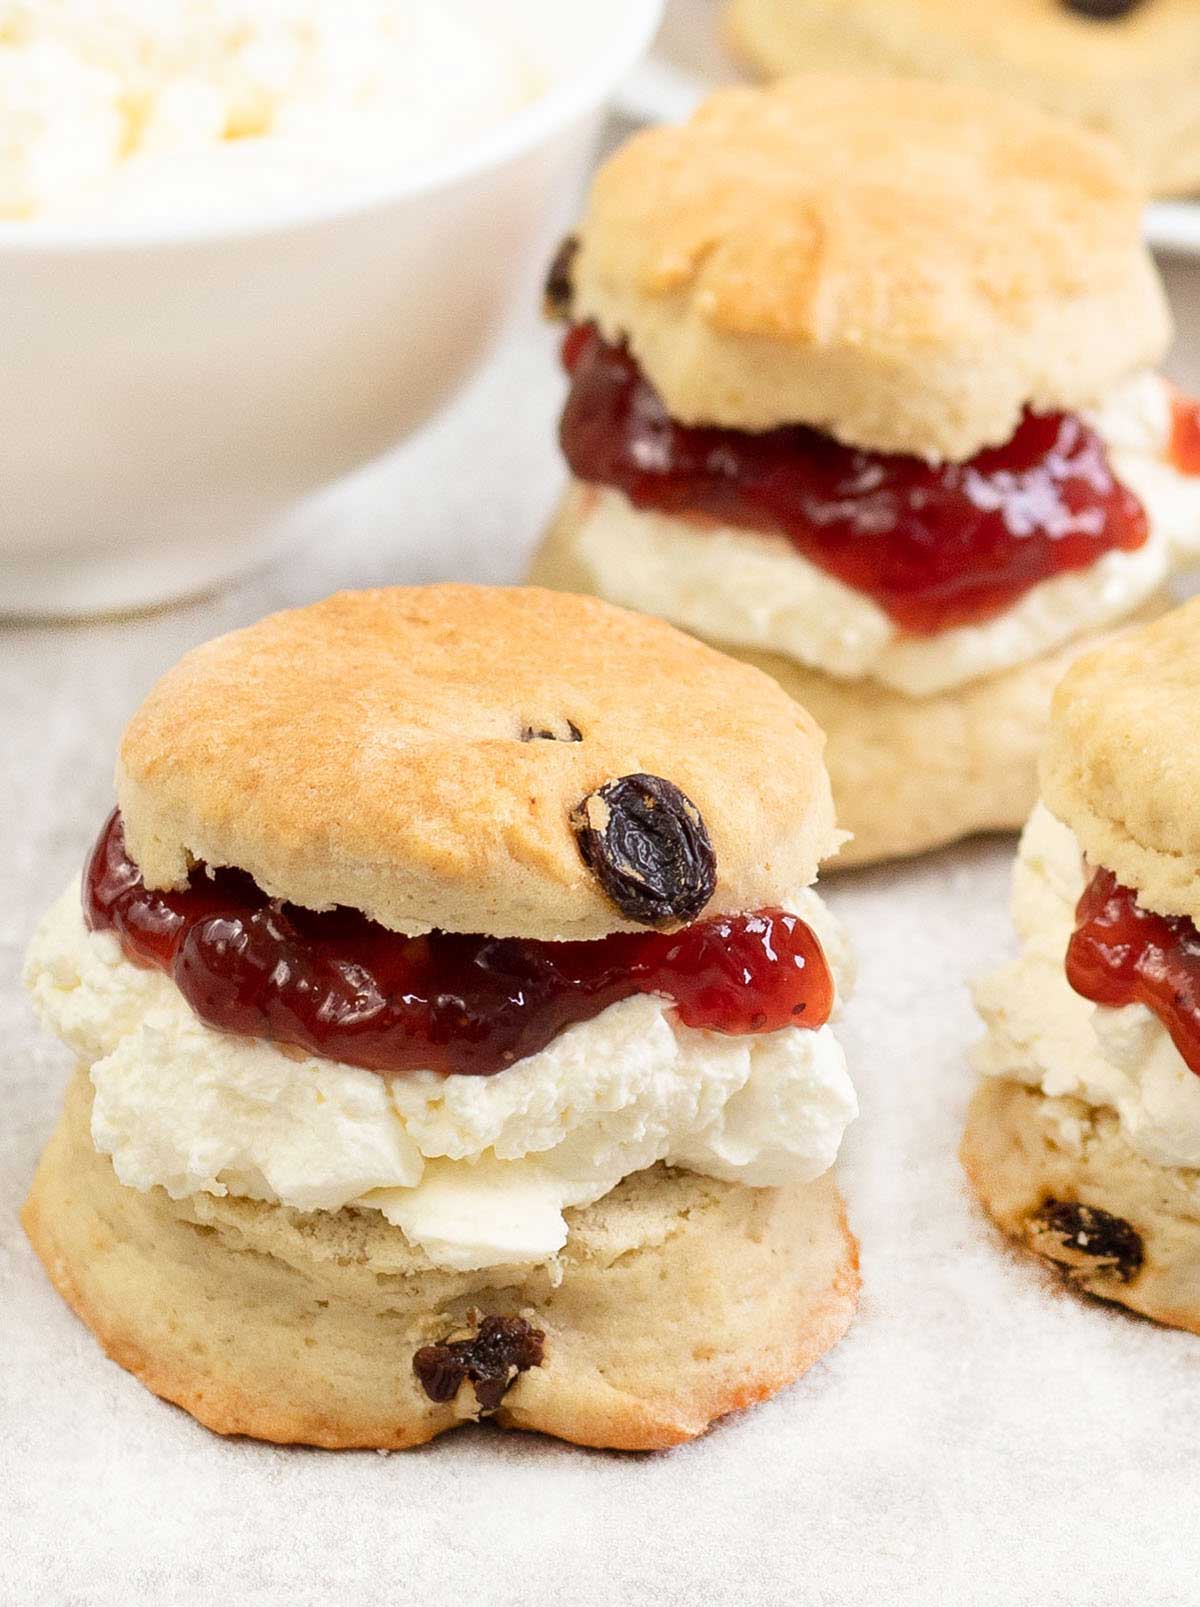 Sultana Scones filled with cream and jam